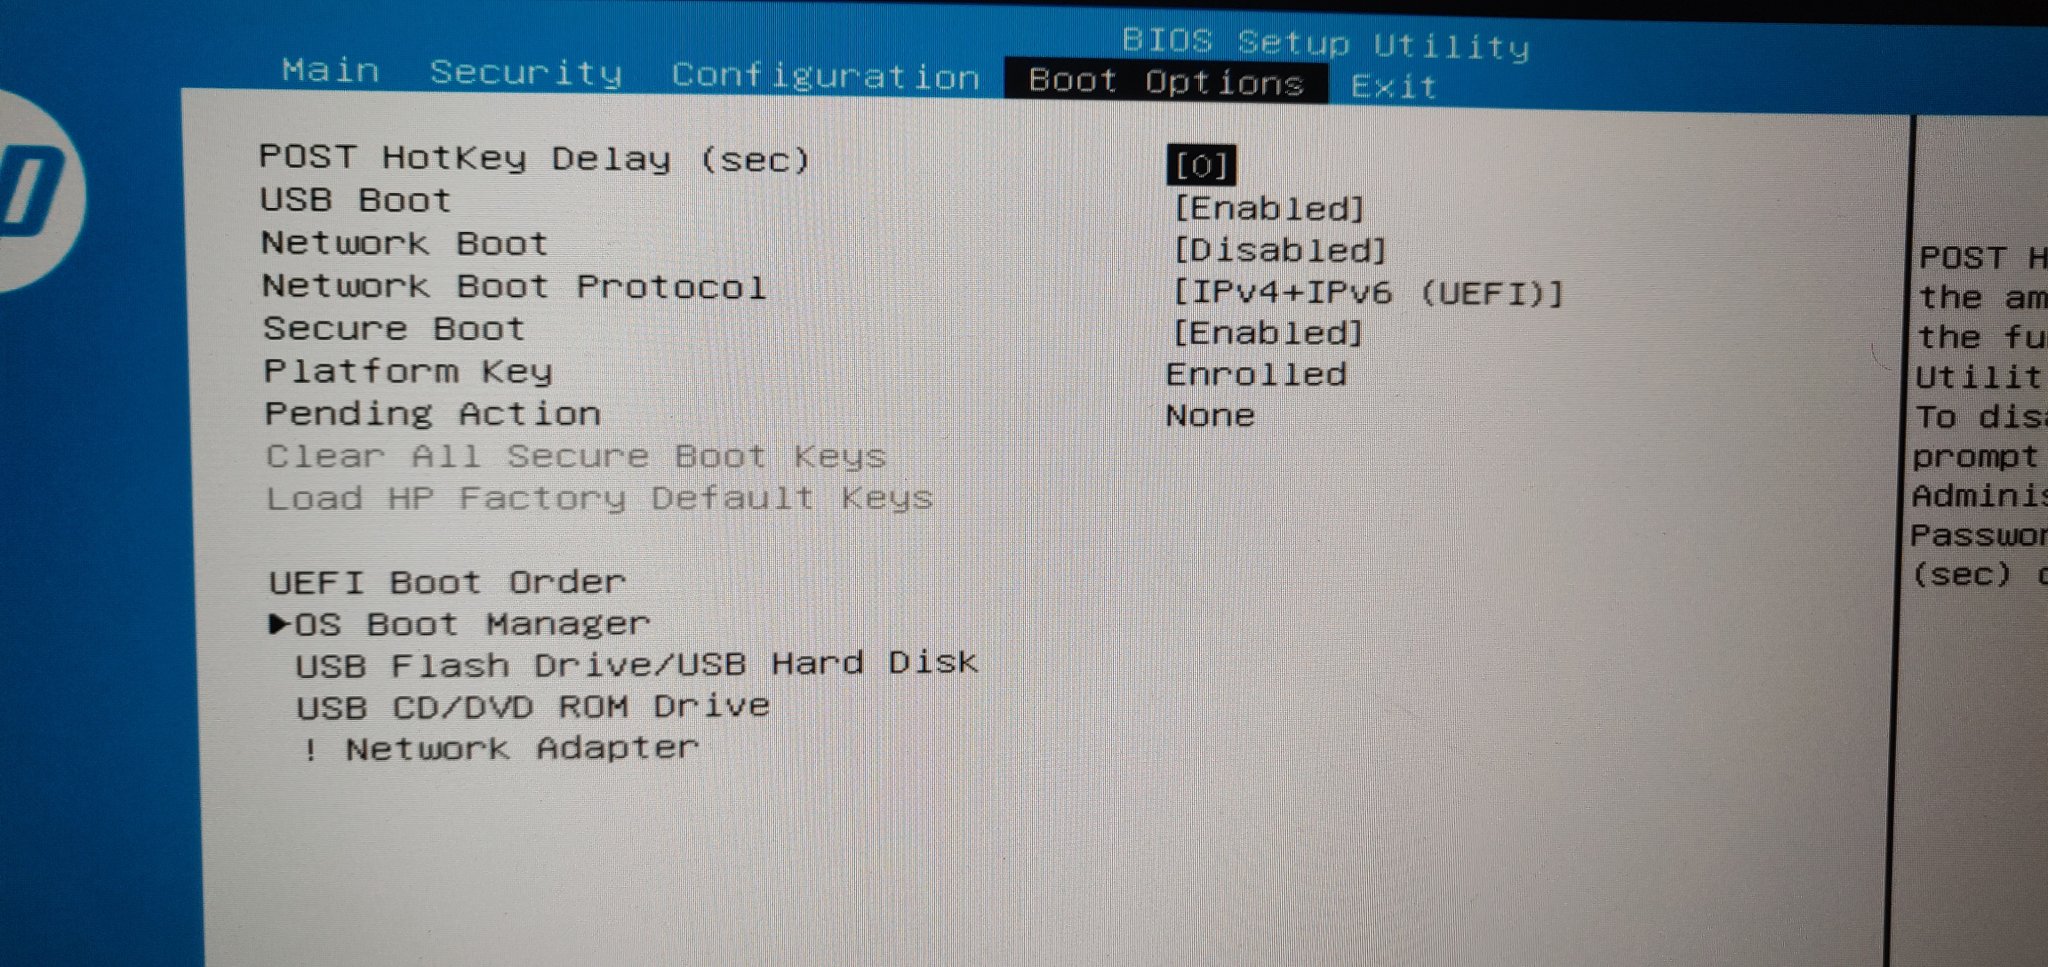 No legacy devices option in the boot menu? - HP Support Community - 8137023